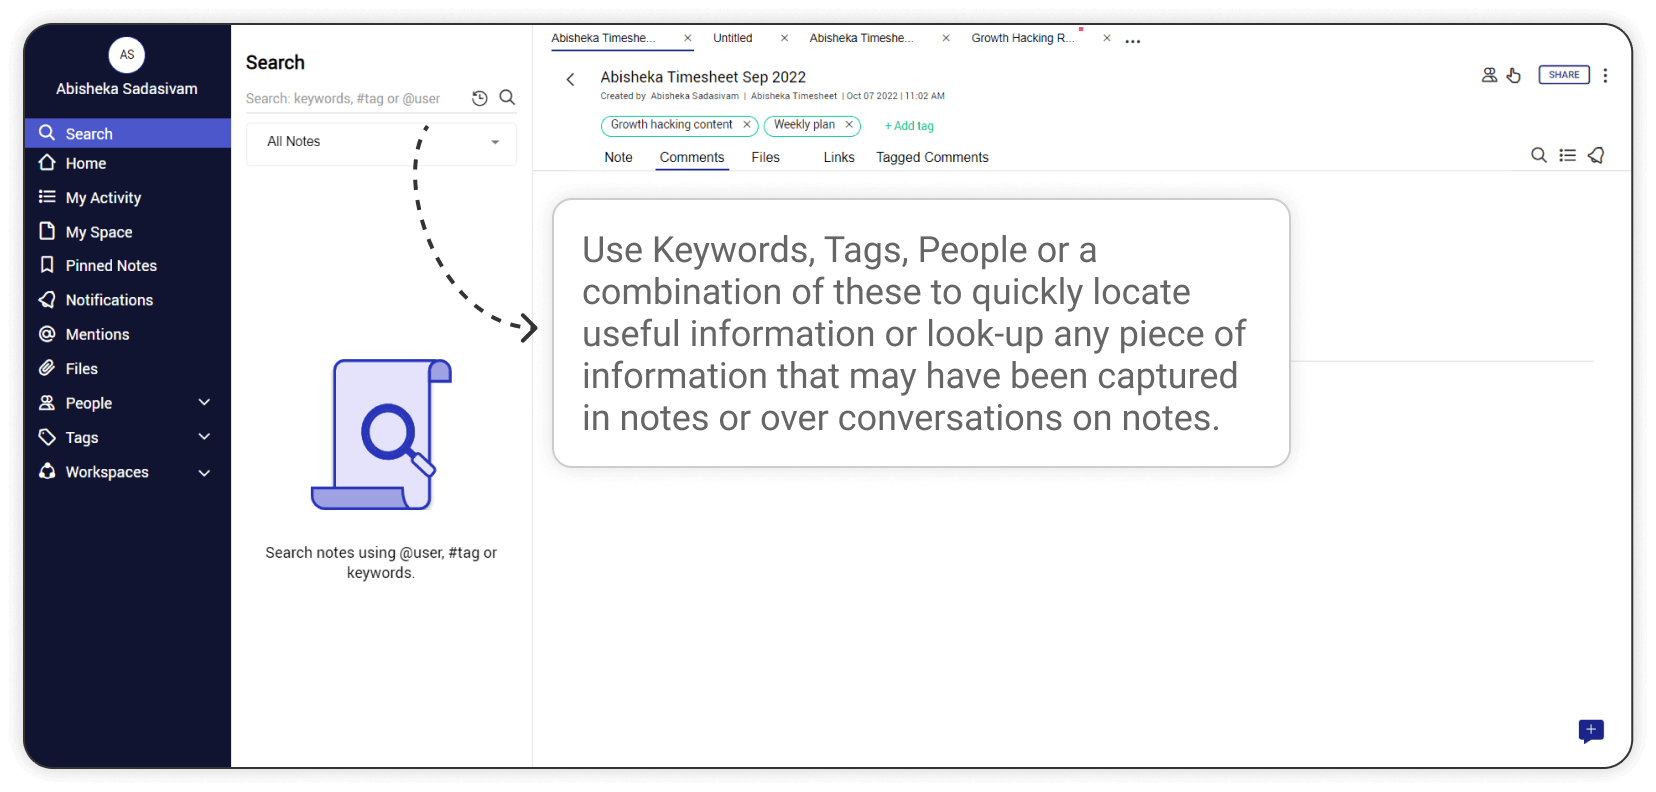 Use Keywords, Tags, People or a combination of these to quickly locate useful information or look-up any piece of information that may have been captured in notes or over conversations on notes.